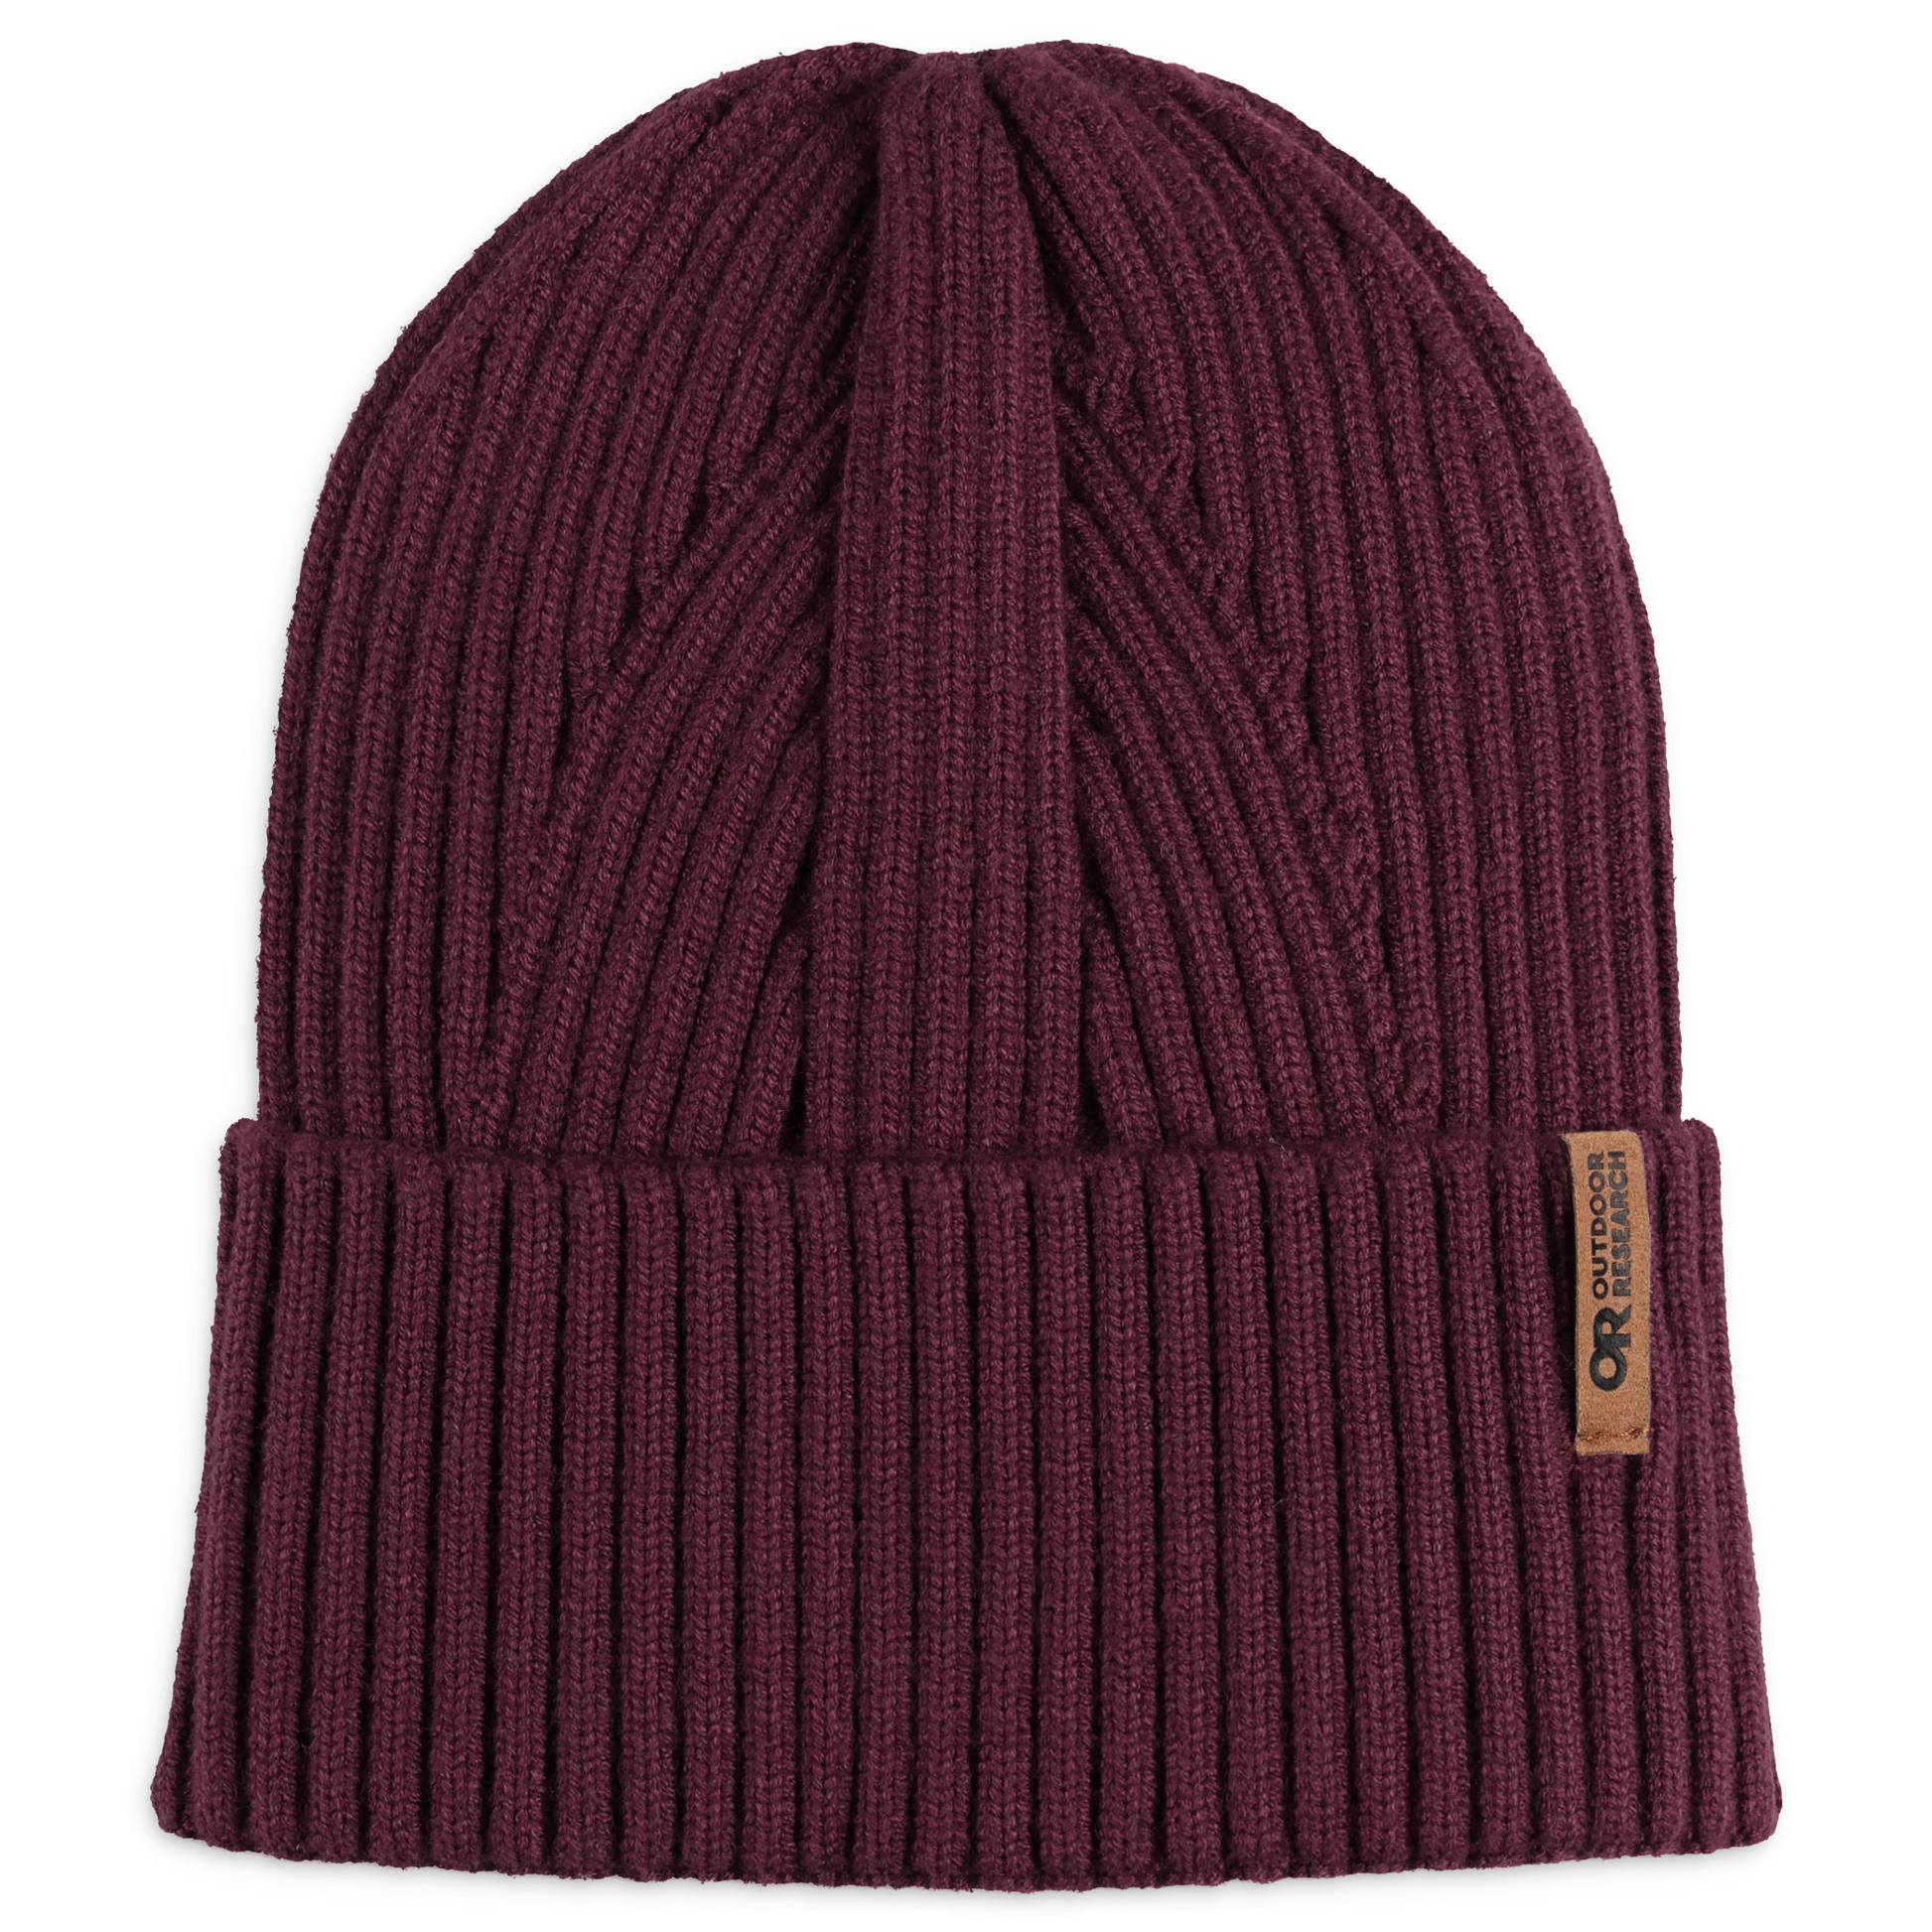 Beanie with CD Signature Plum and Beige Wool Knit